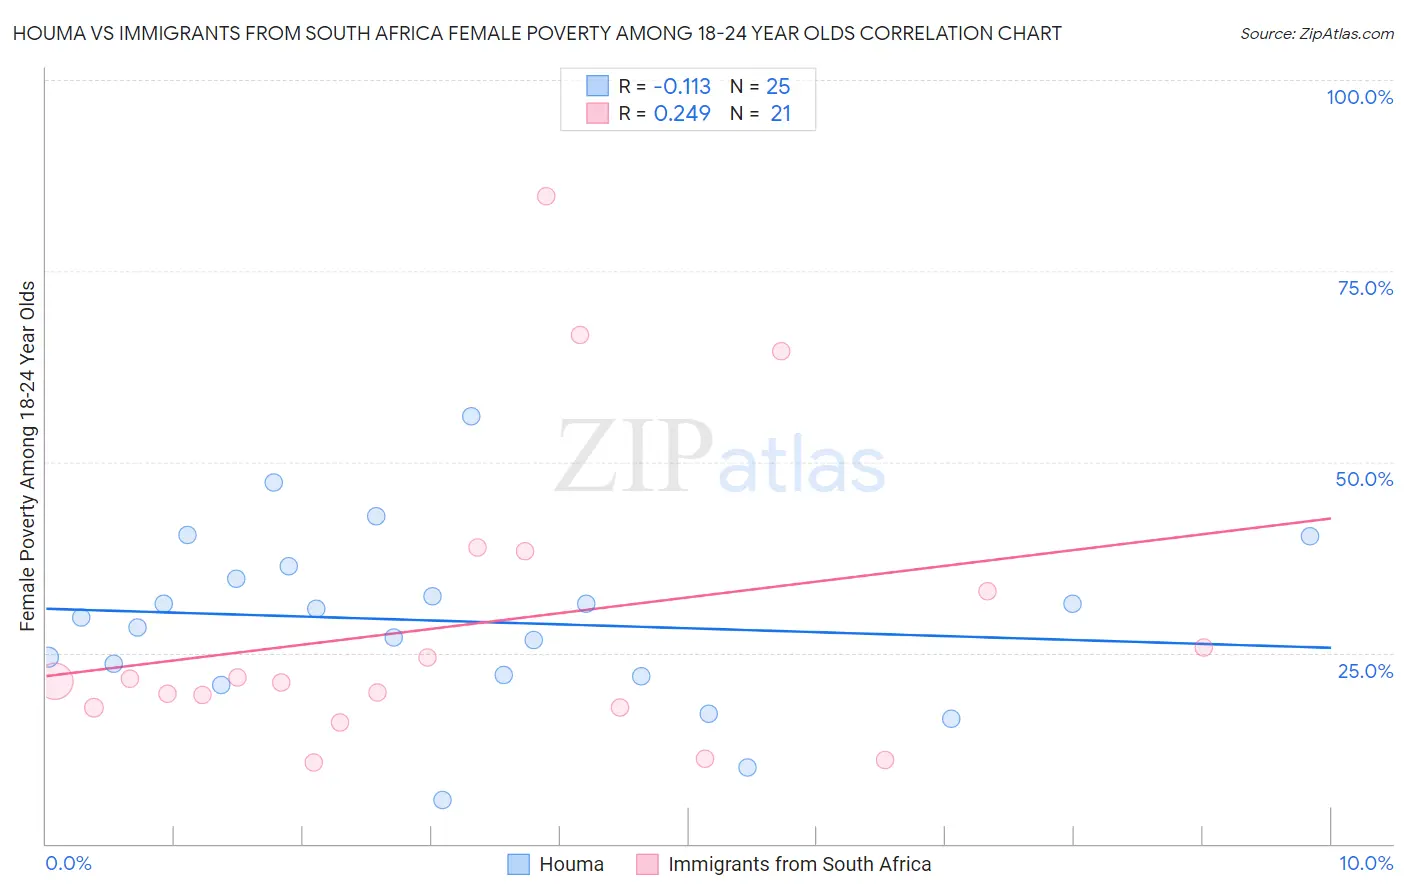 Houma vs Immigrants from South Africa Female Poverty Among 18-24 Year Olds